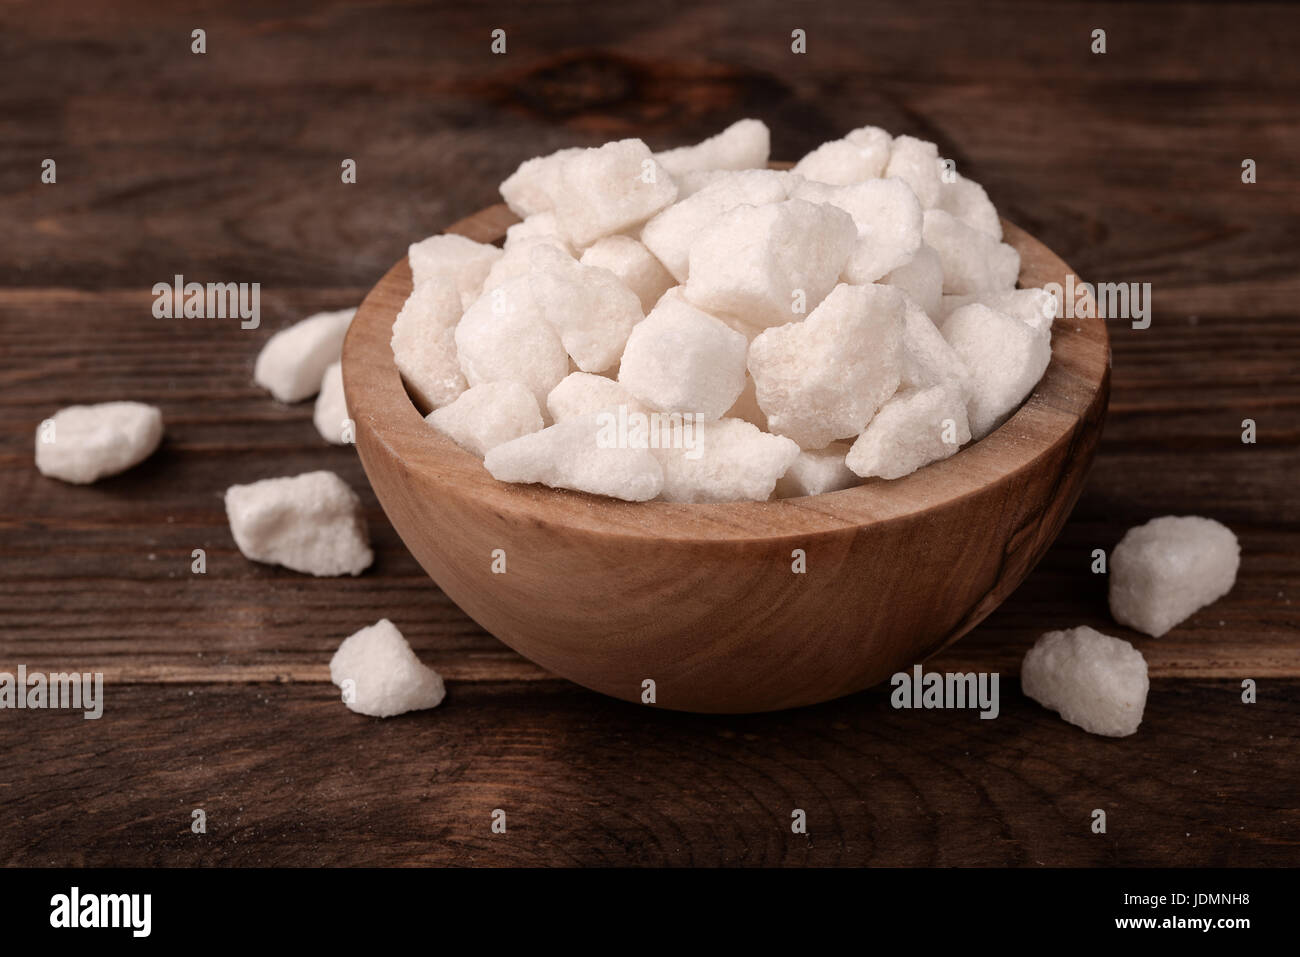 Bowl of natural lump sugar on wooden background Stock Photo